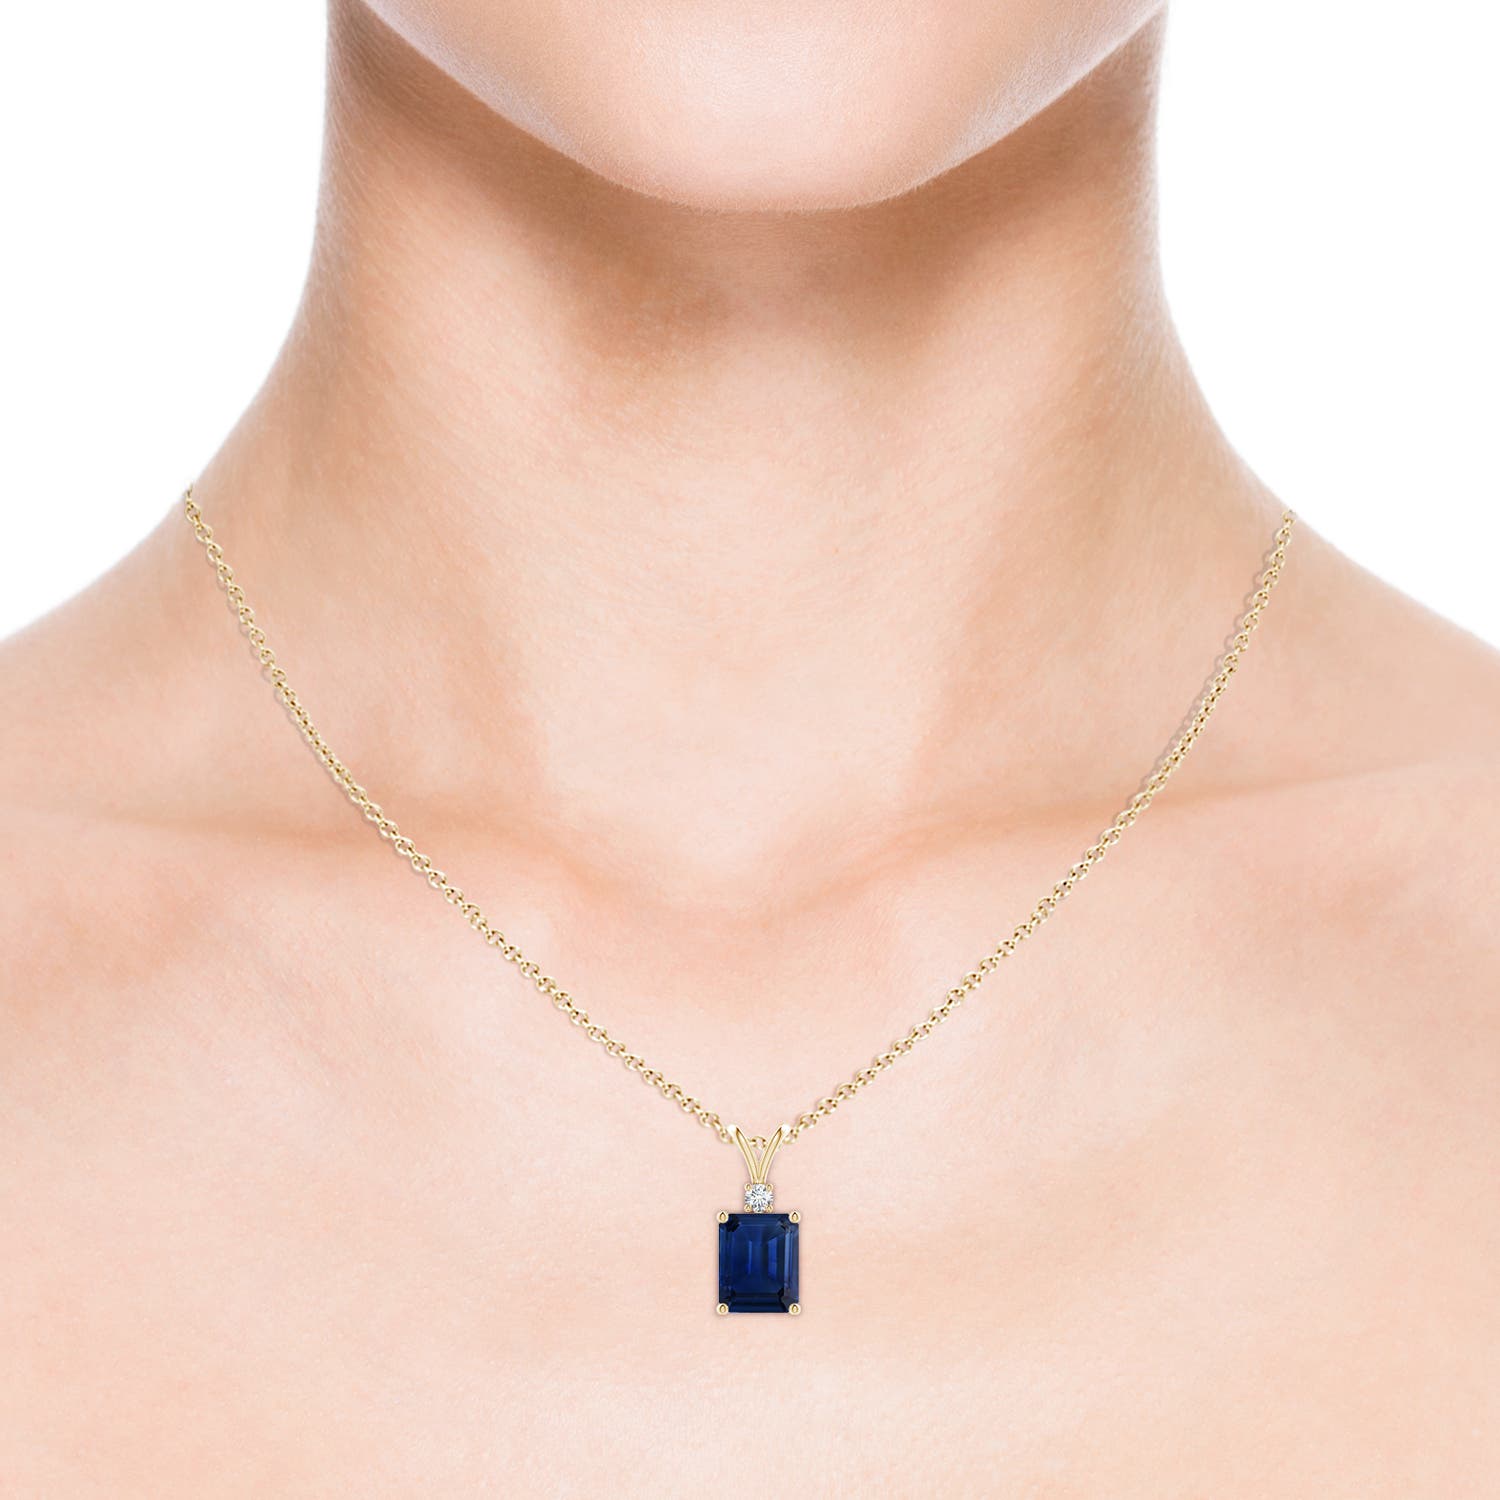 AAA - Blue Sapphire / 3.51 CT / 14 KT Yellow Gold